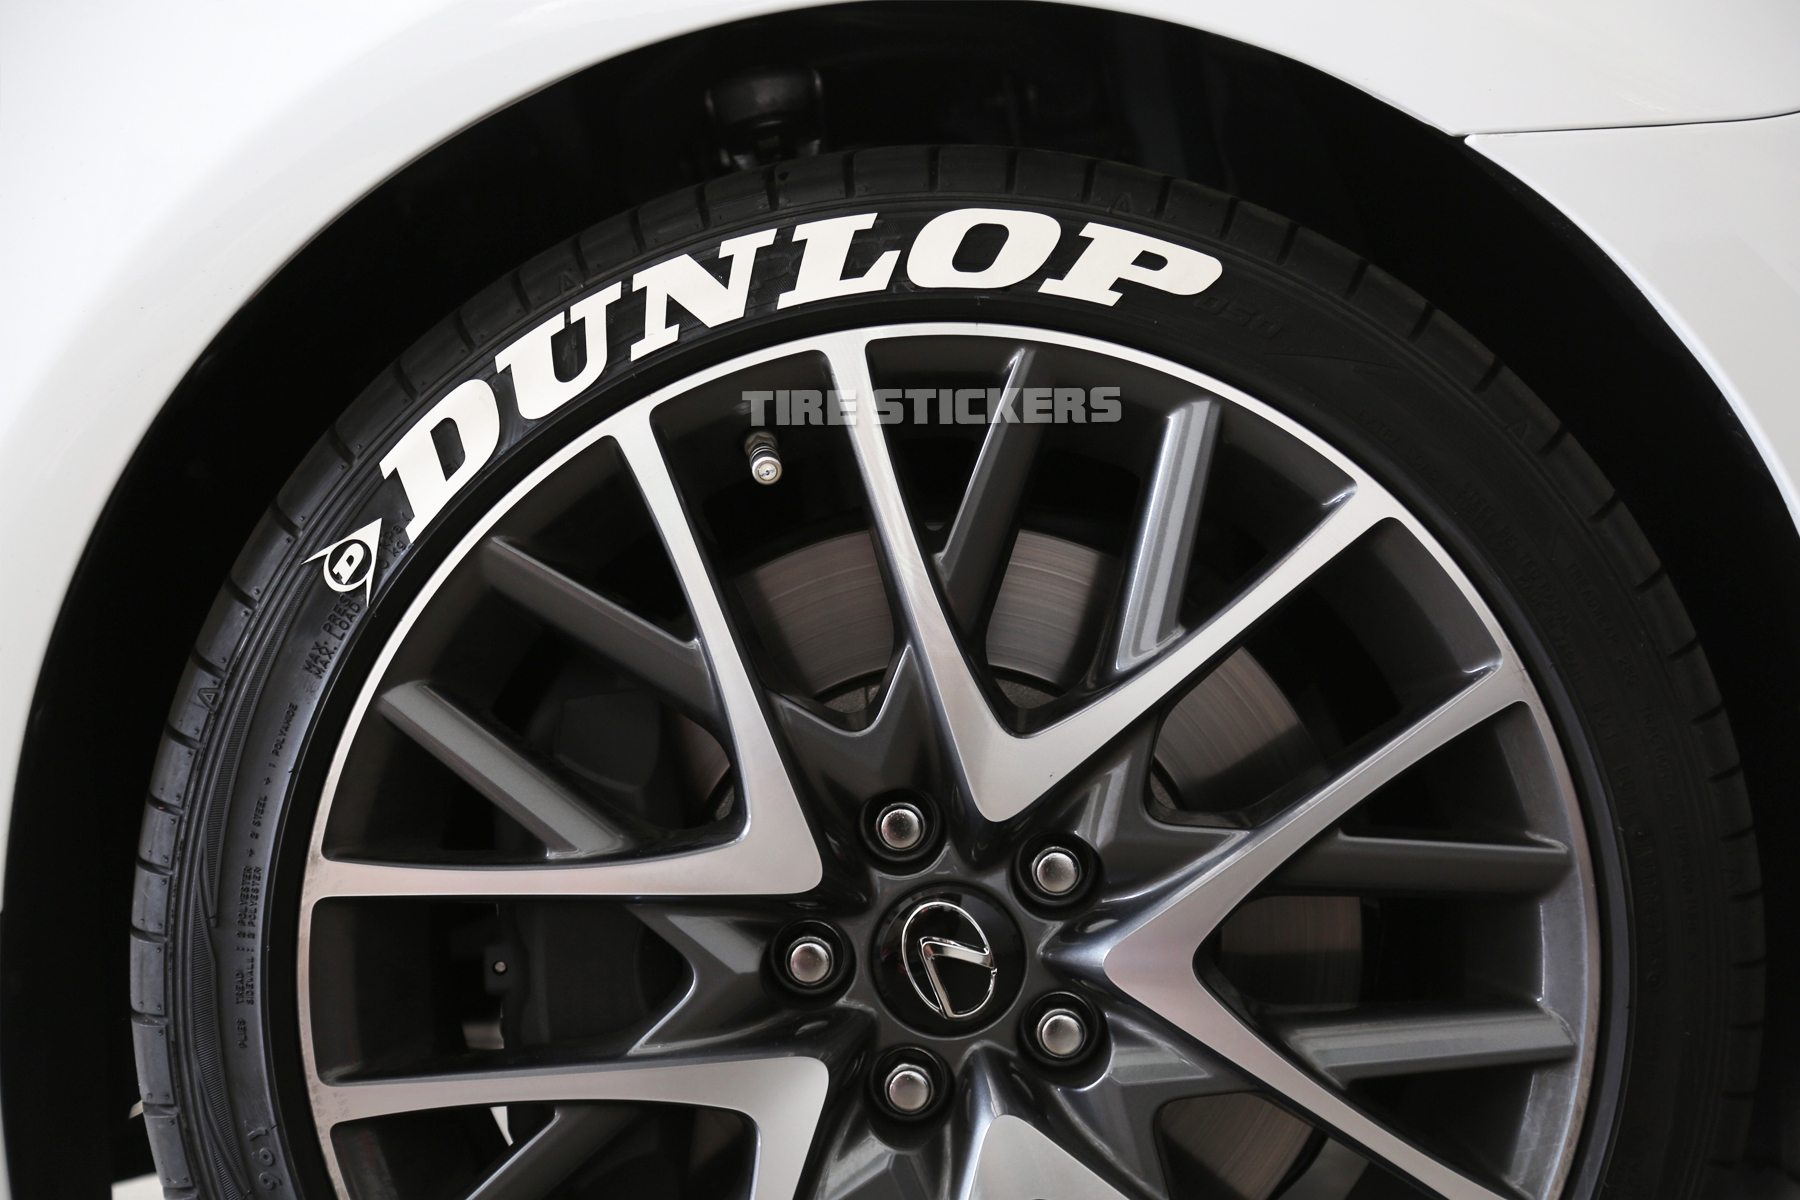 1.25" For 17" 18" Wheels WHITE Rubber Lettering 4pcs DUNLOP Tire Stickers 